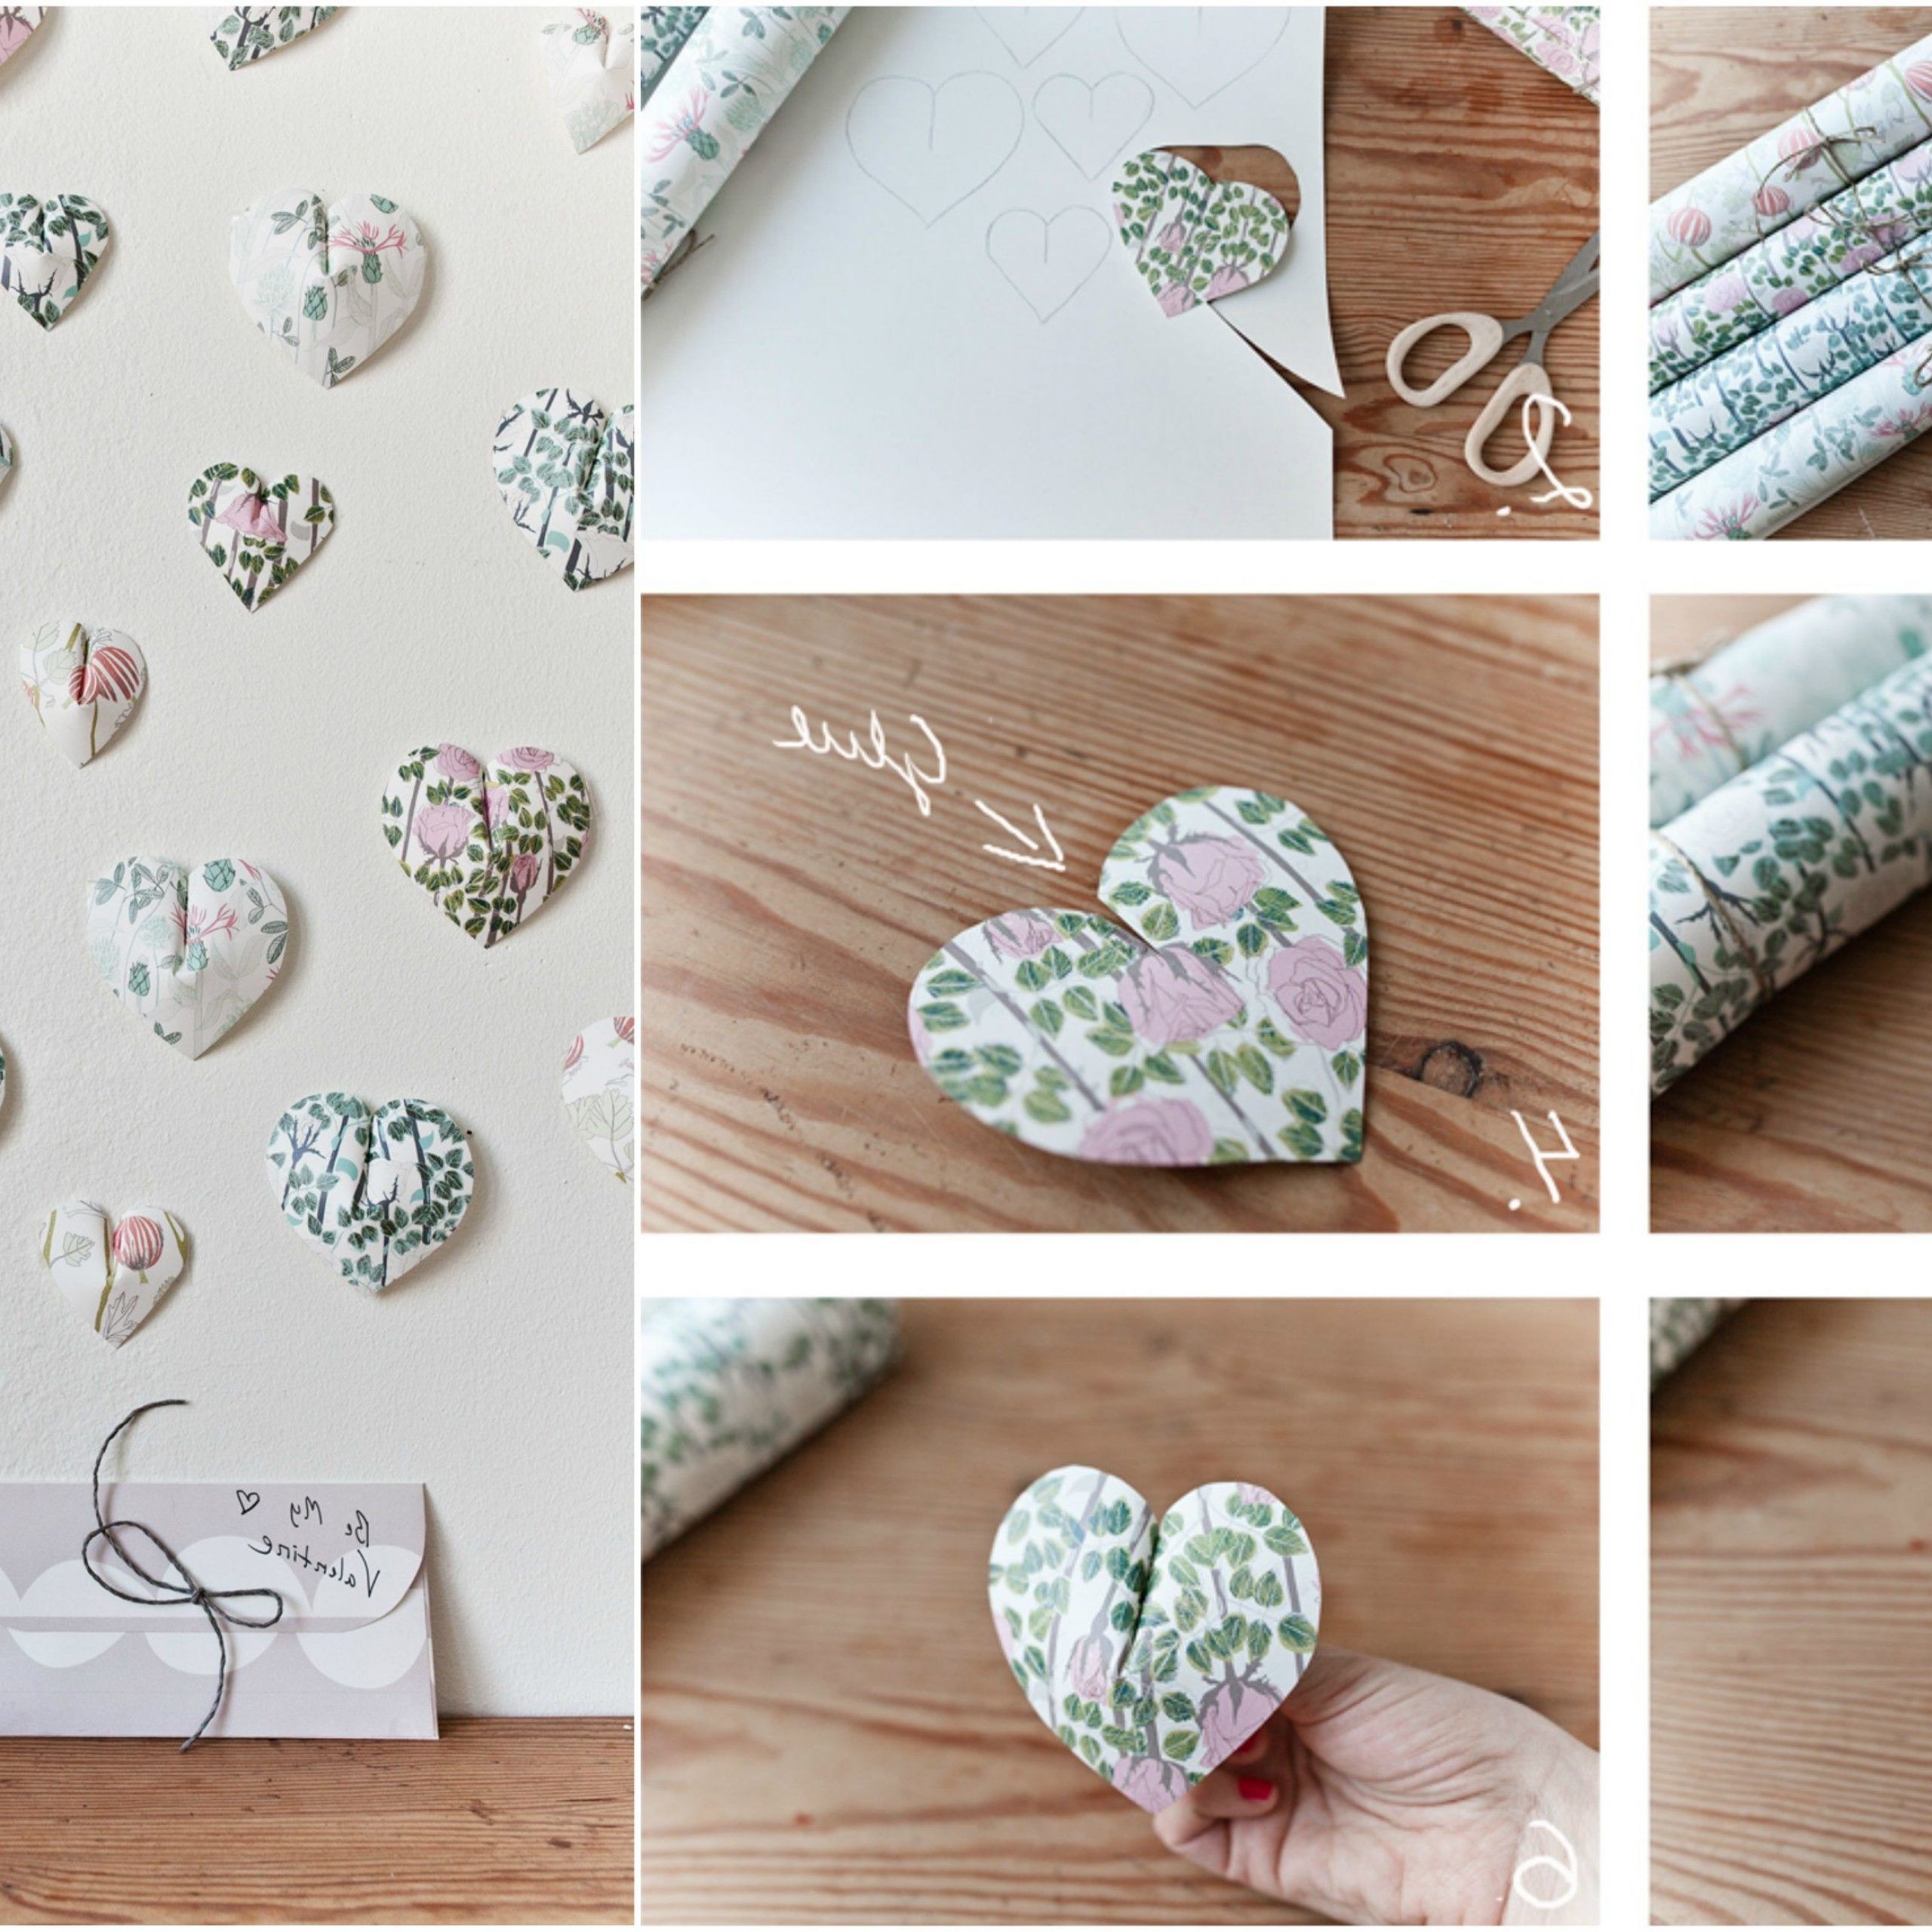 Well Liked Create This Pretty 3d Paper Heart Wall Hanging In 6 Easy Steps Regarding Paper Art Wall Art (View 10 of 15)